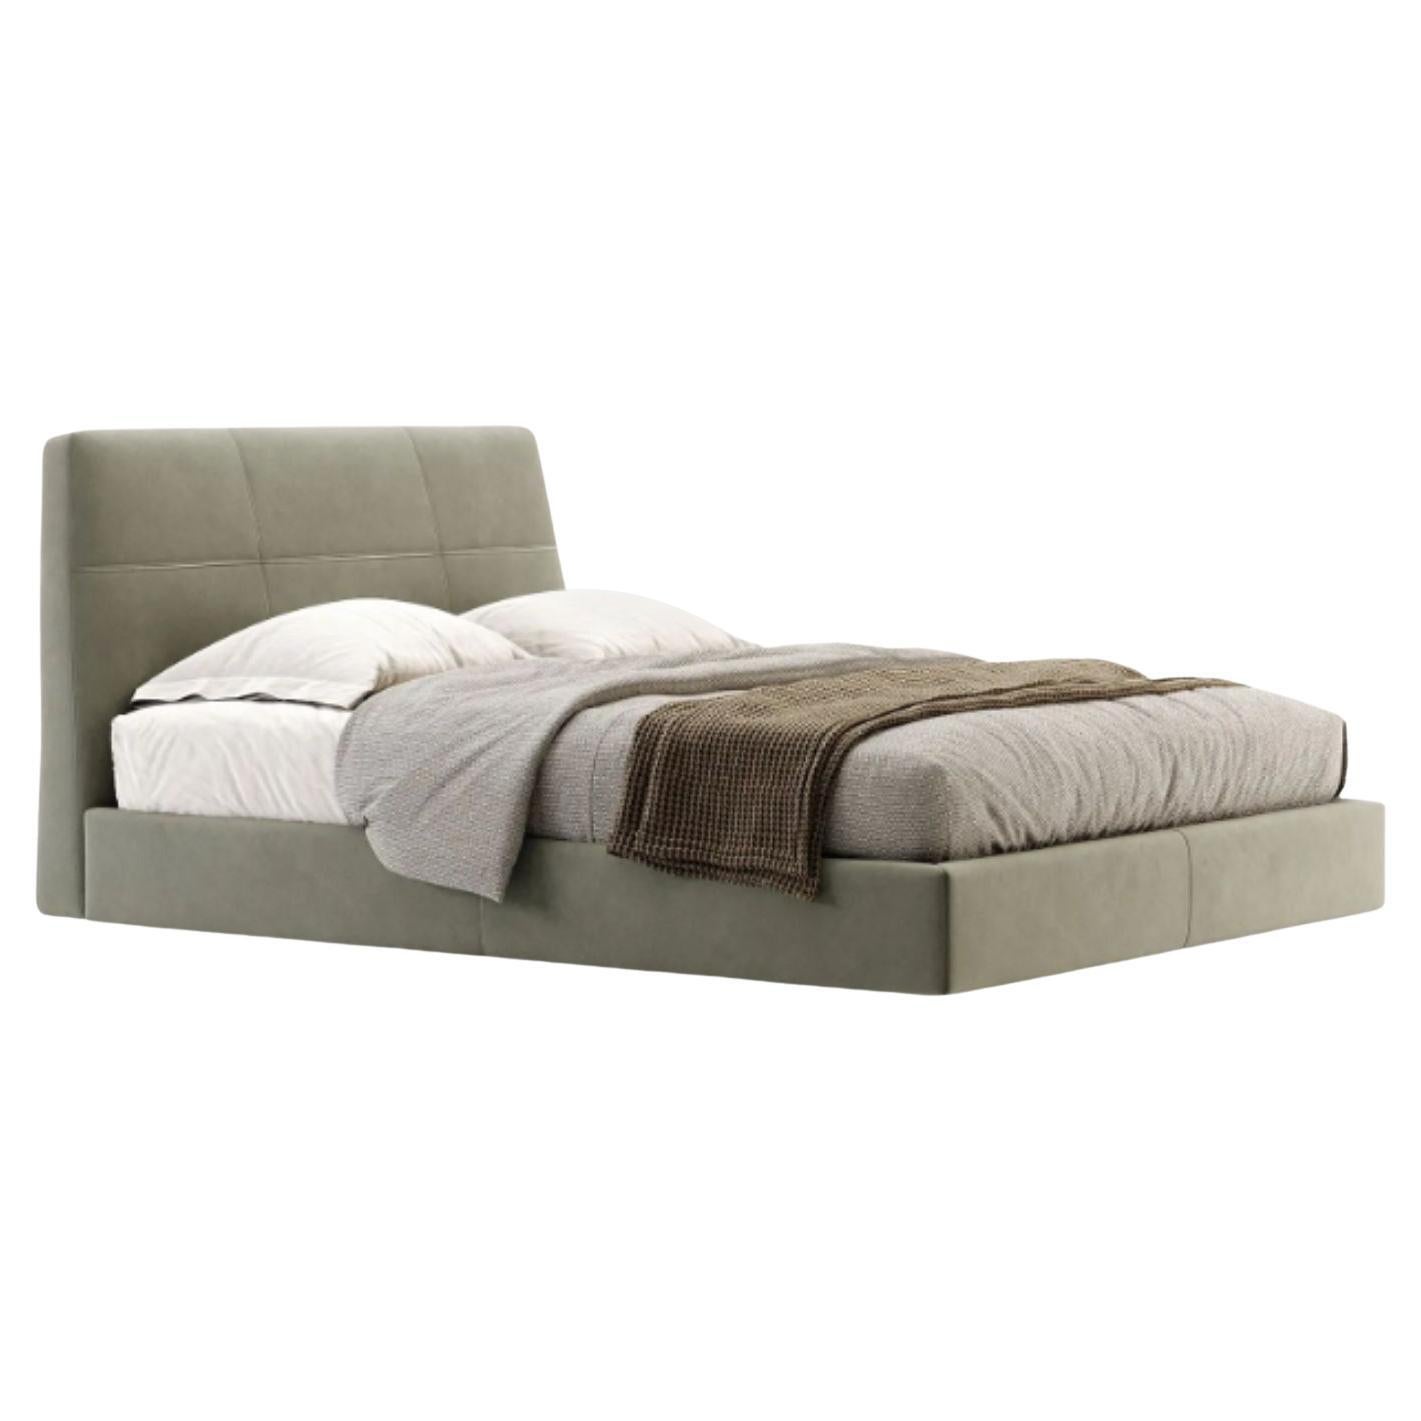 Queen Size Shelby Bed by Domkapa For Sale